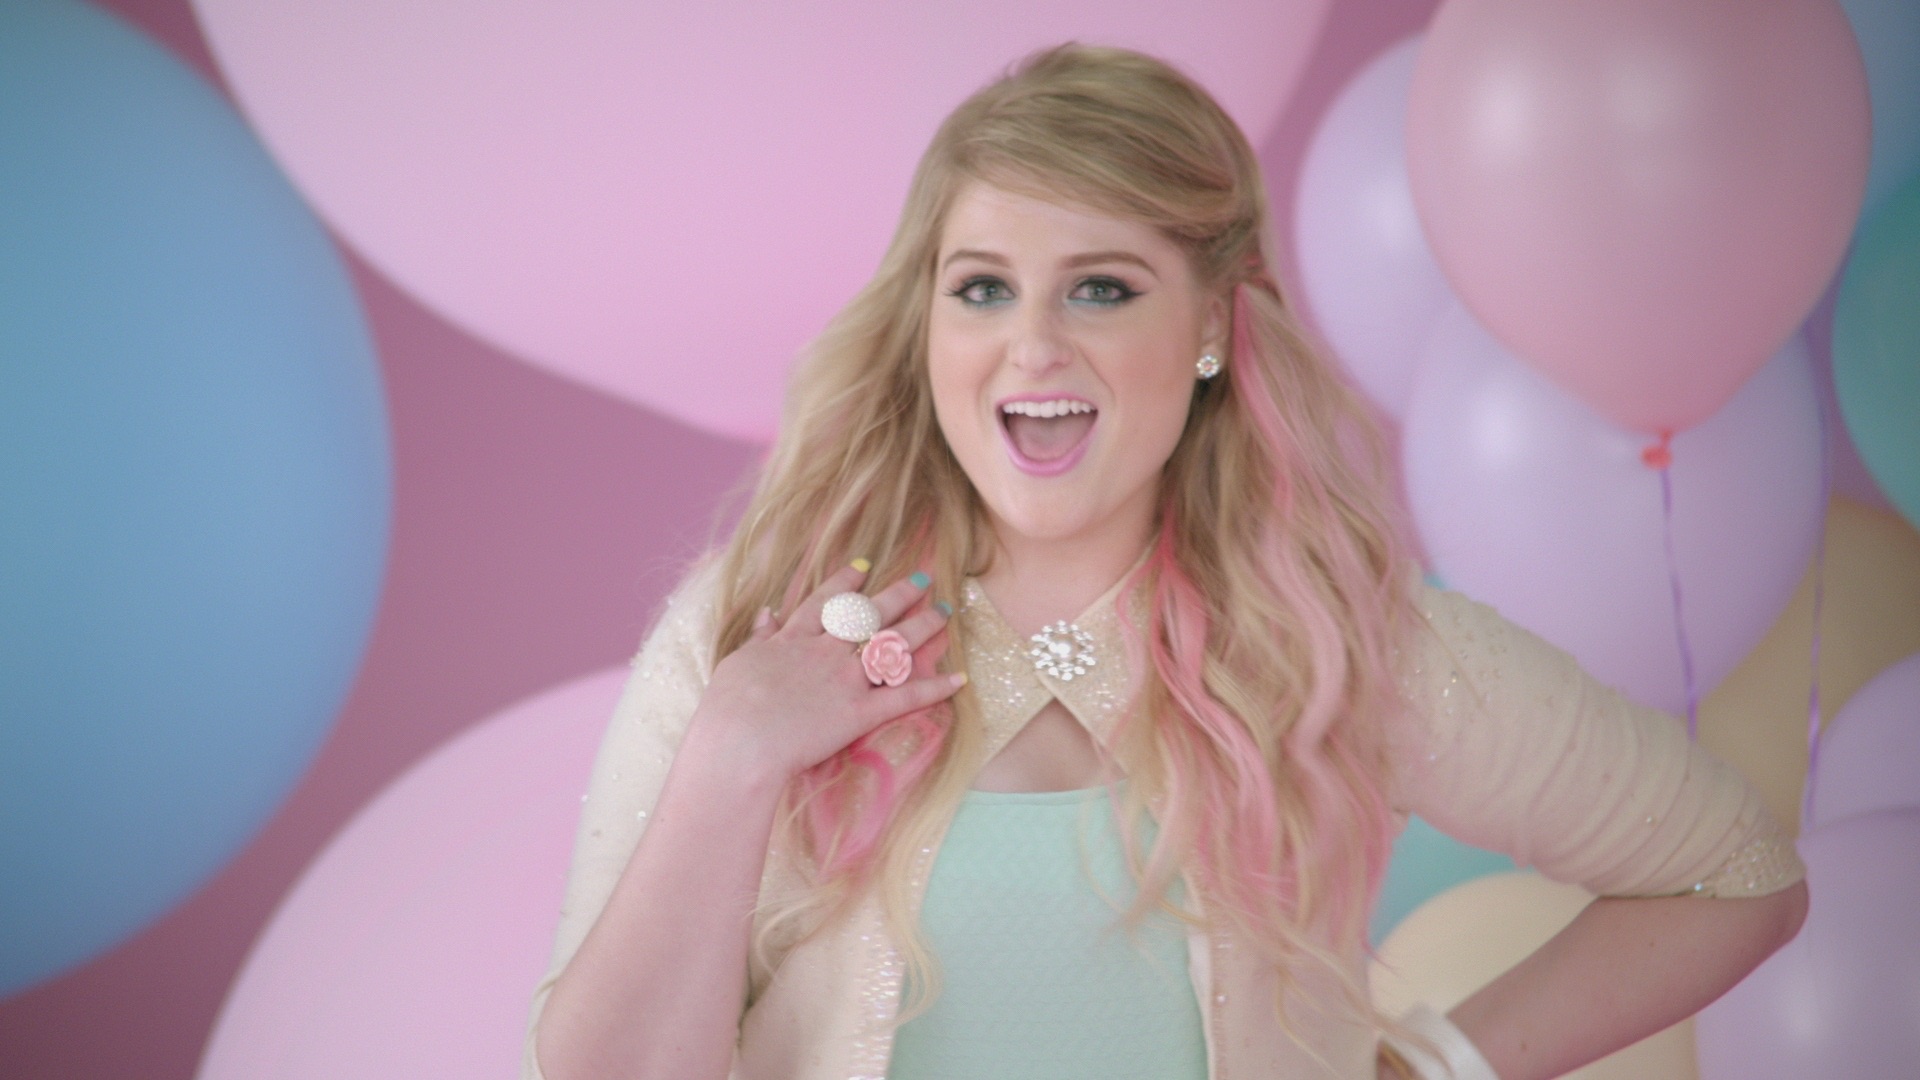 Meghan Trainor Is Still All About That Bass in 'Lips Are Movin' Video